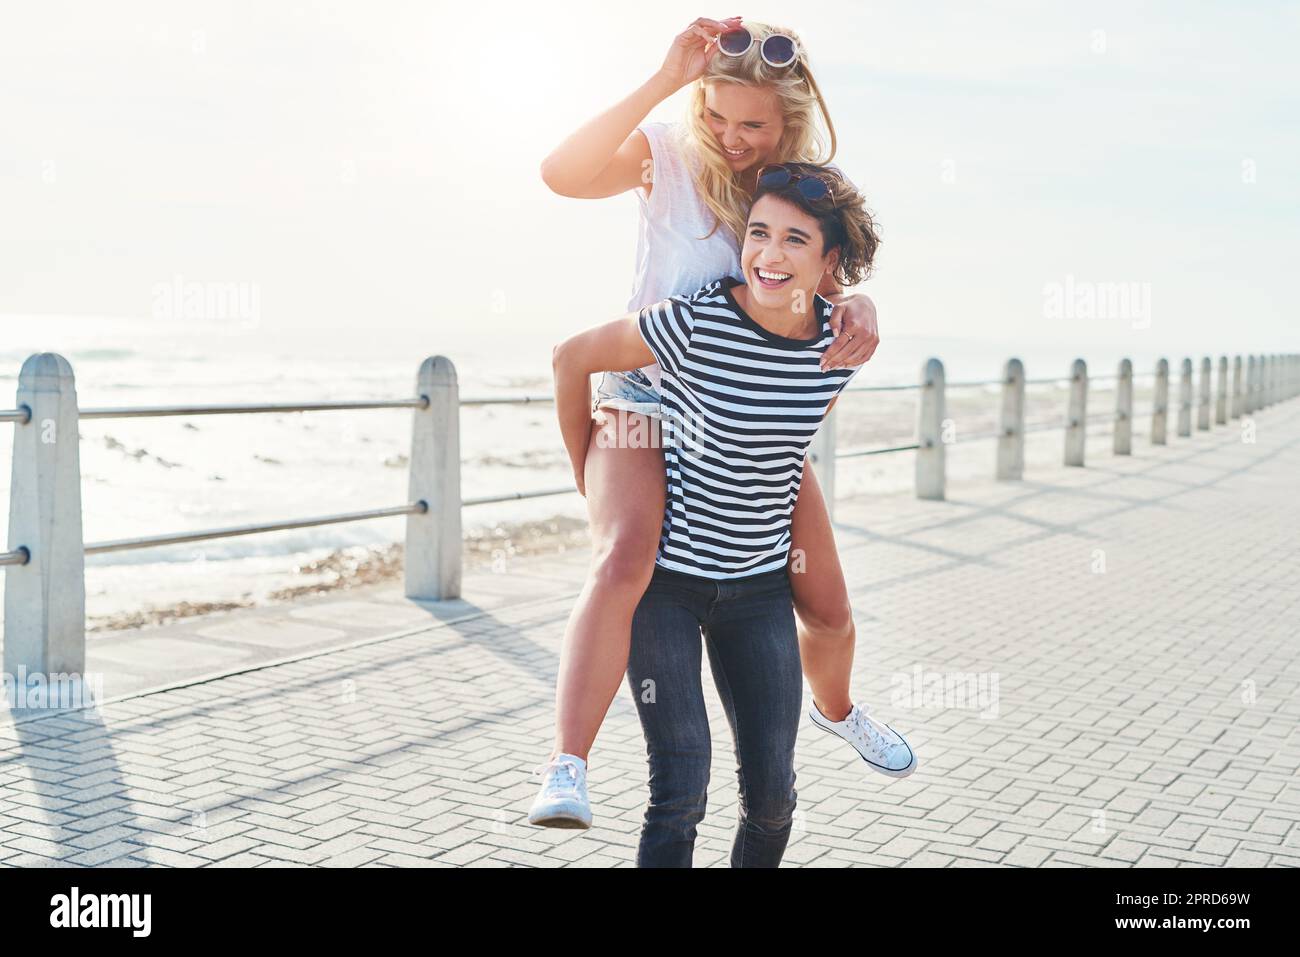 All you need is a good friend. two friends spending the day together on a sunny day. Stock Photo